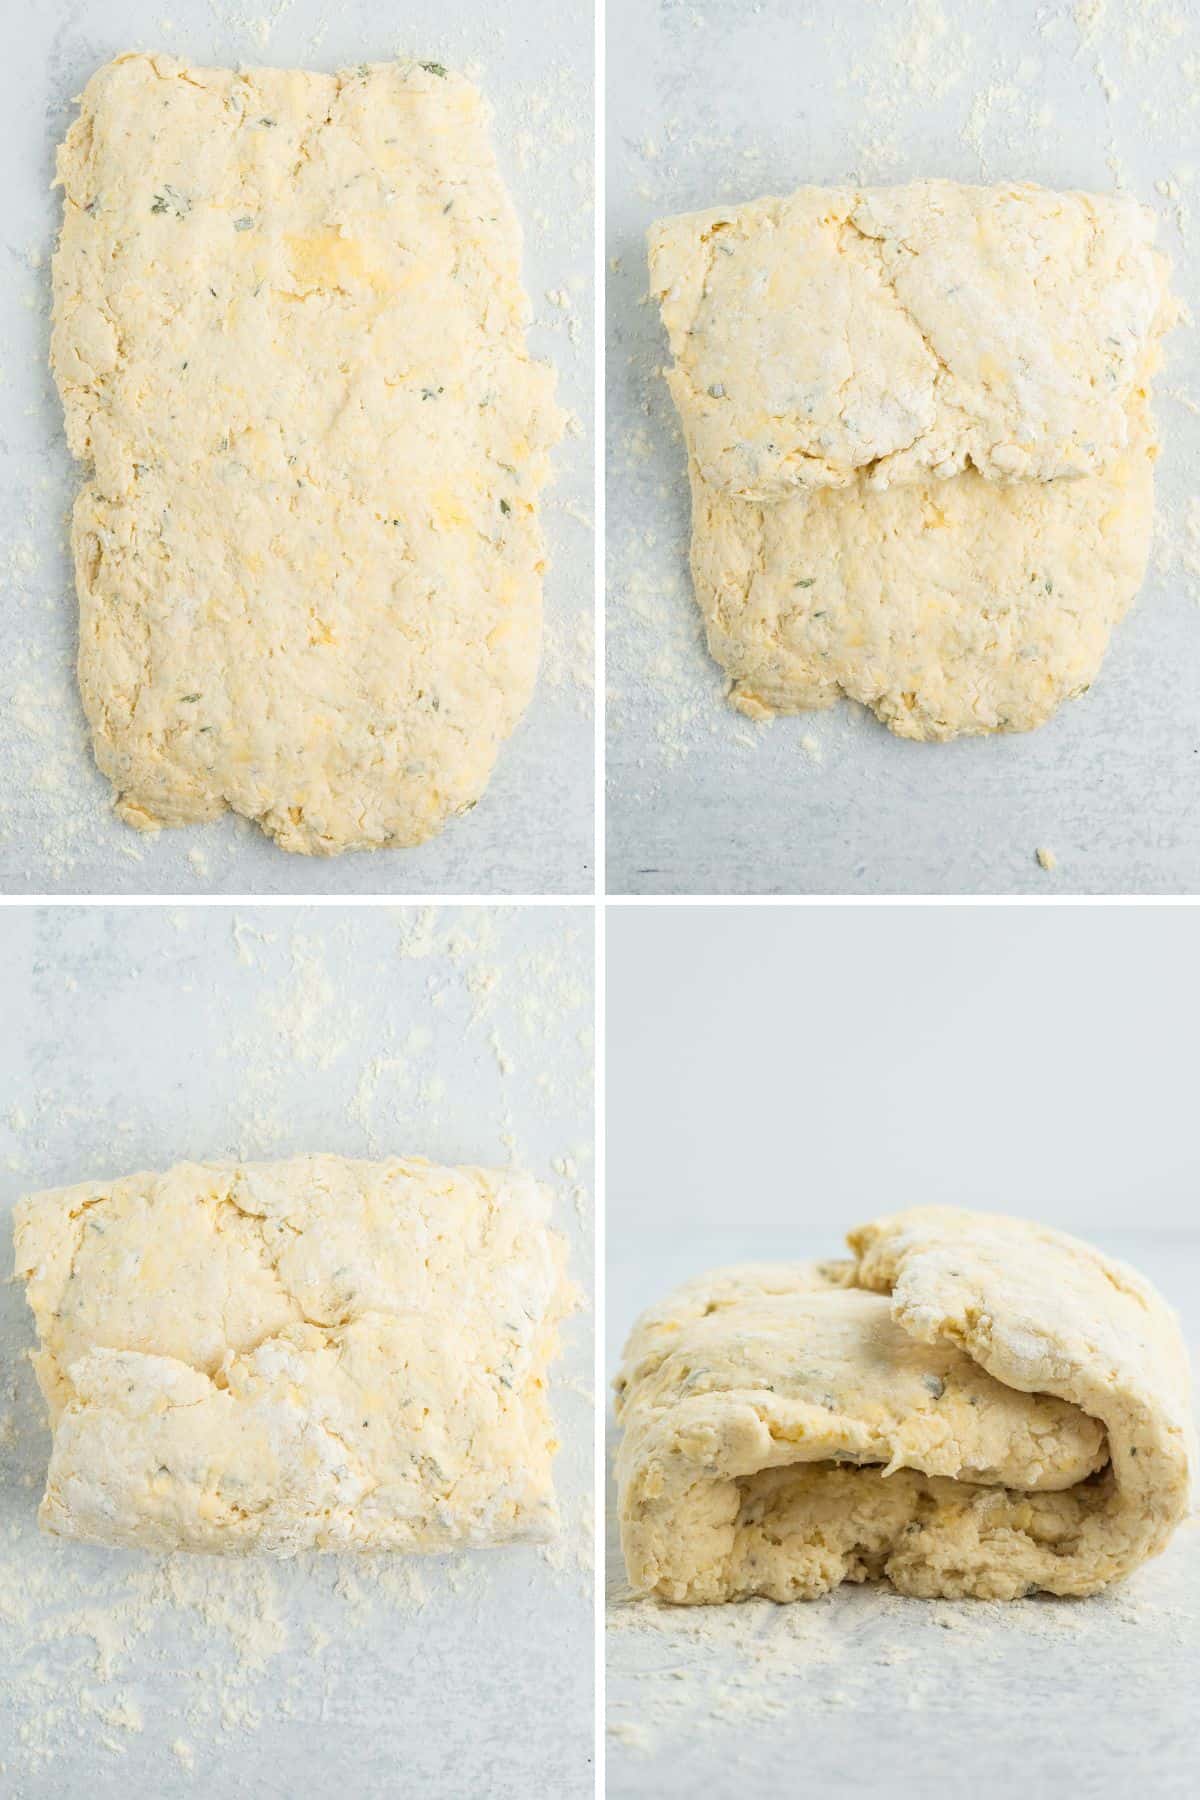 4 photos showing the process of making herb biscuits.